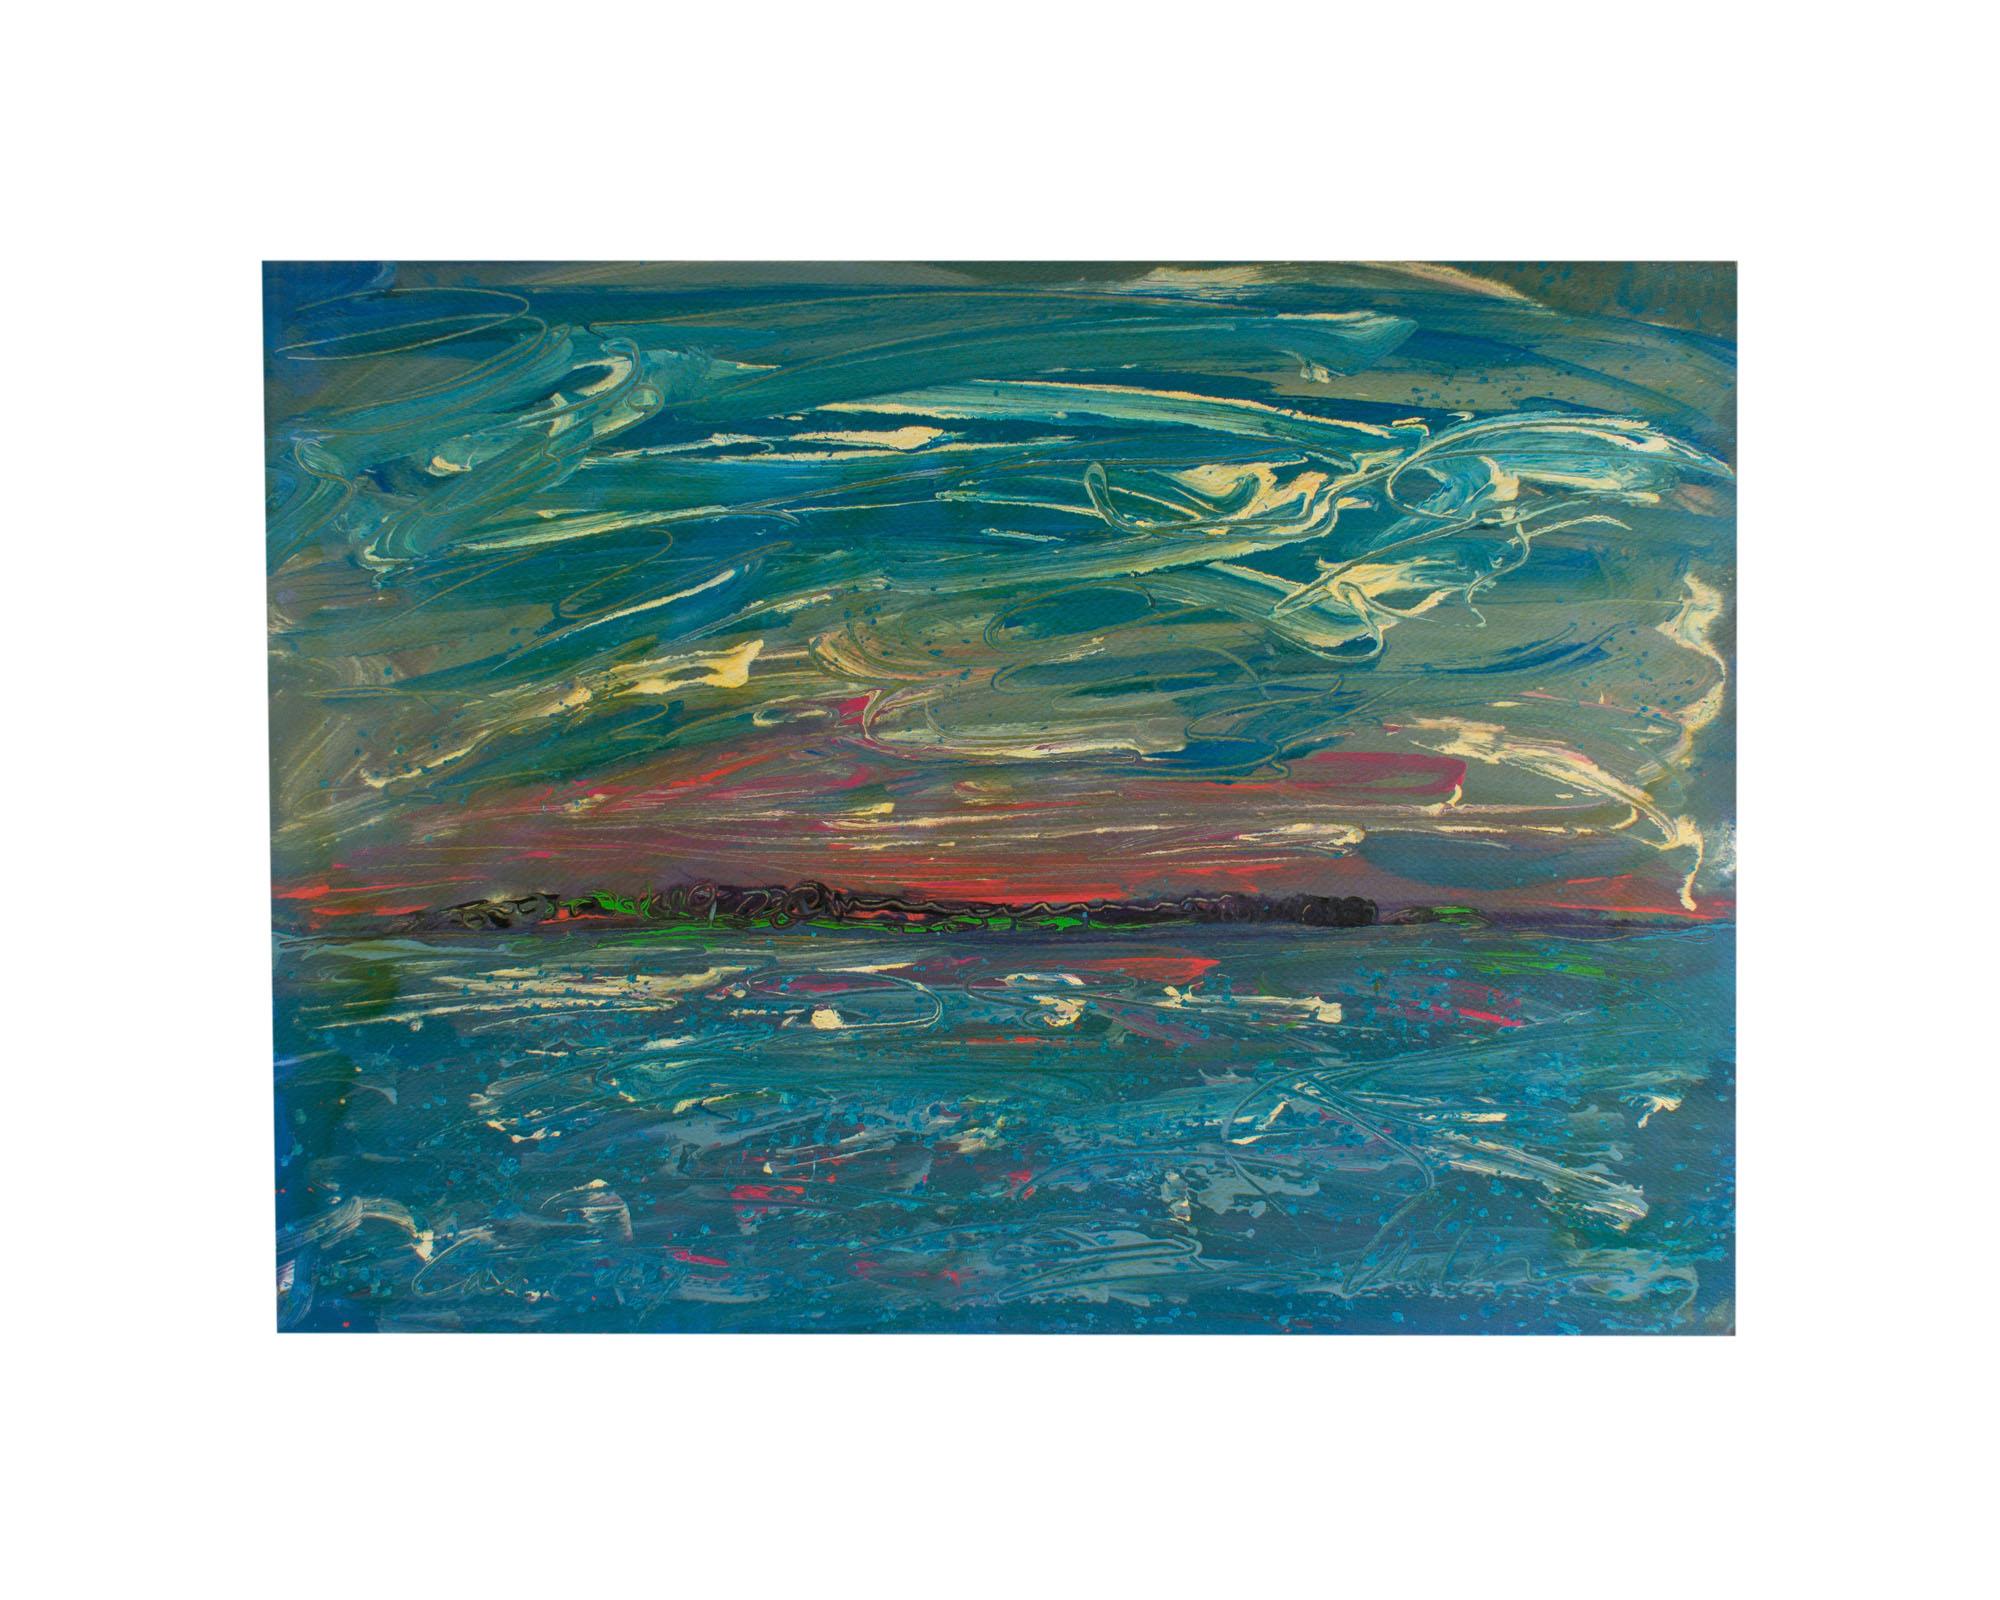 A 1980s abstract acrylic on paper landscape painting titled, Cat Cay, by American artist Harry Hilson (1935-2004). Gestural lines come together to create a vibrant landscape with green, aqua blue, yellow, and white. A pink and purple sky is in the